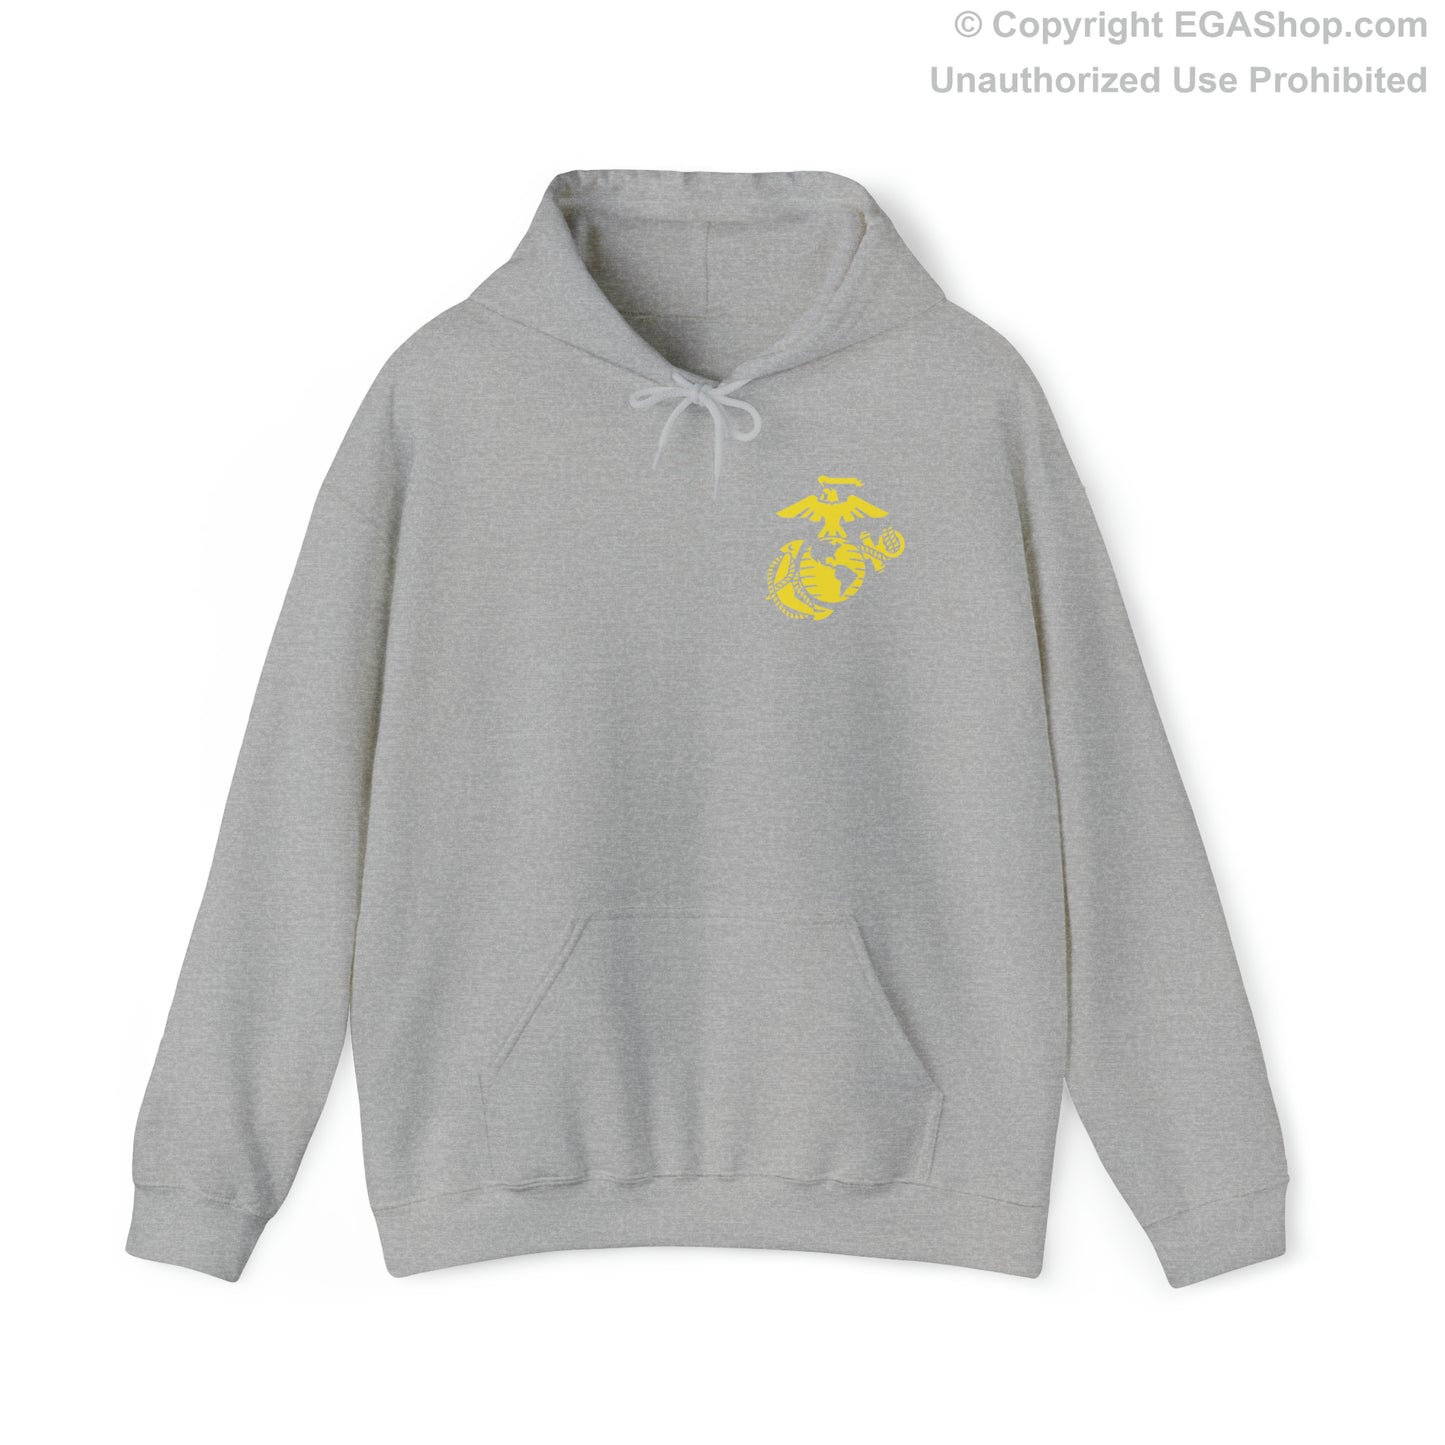 Hoodie: Hotel Co. MCRD San Diego (2nd Battalion Crest on BACK)